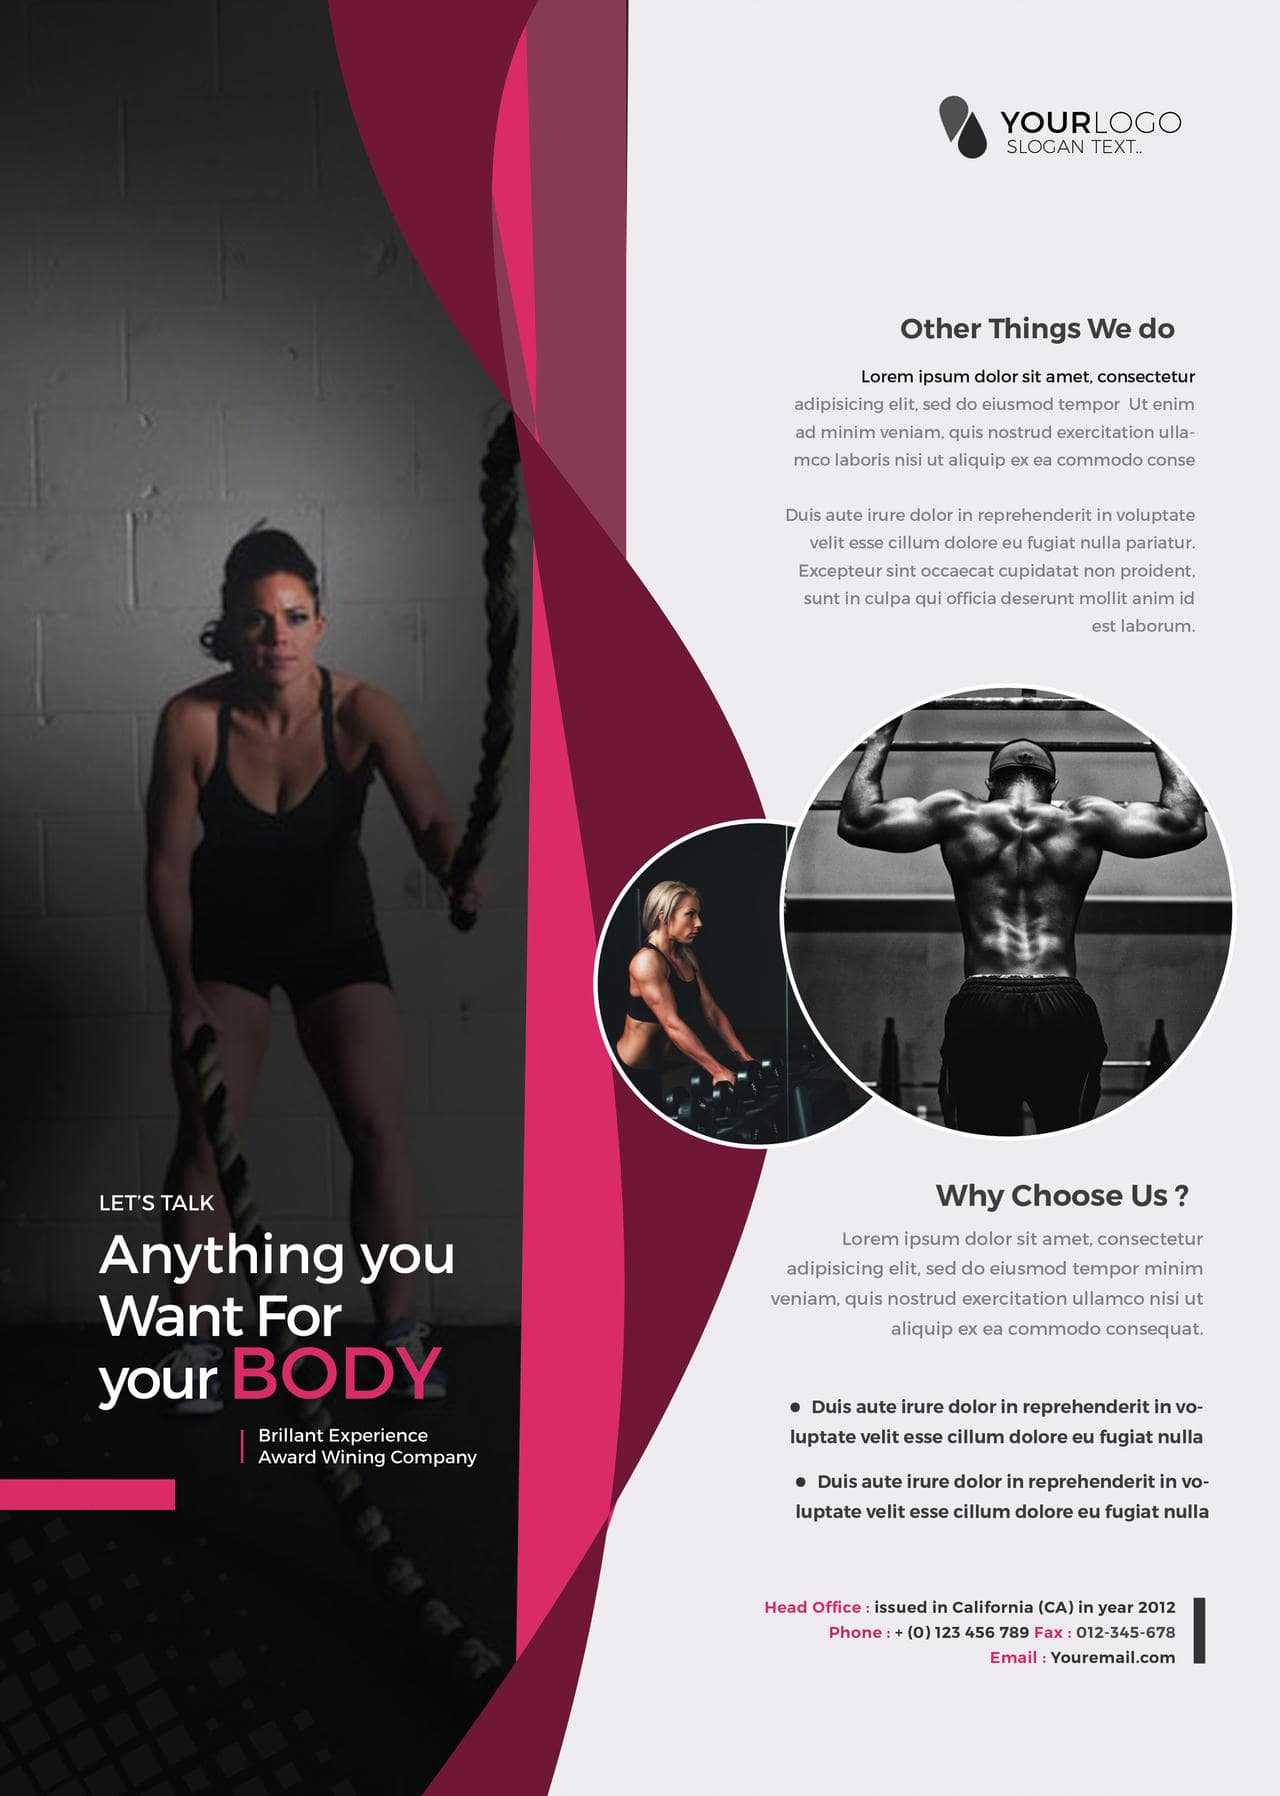 Health & Fitness Free Psd Flyer Template – Free Psd Flyer Regarding Free Health Flyer Templates